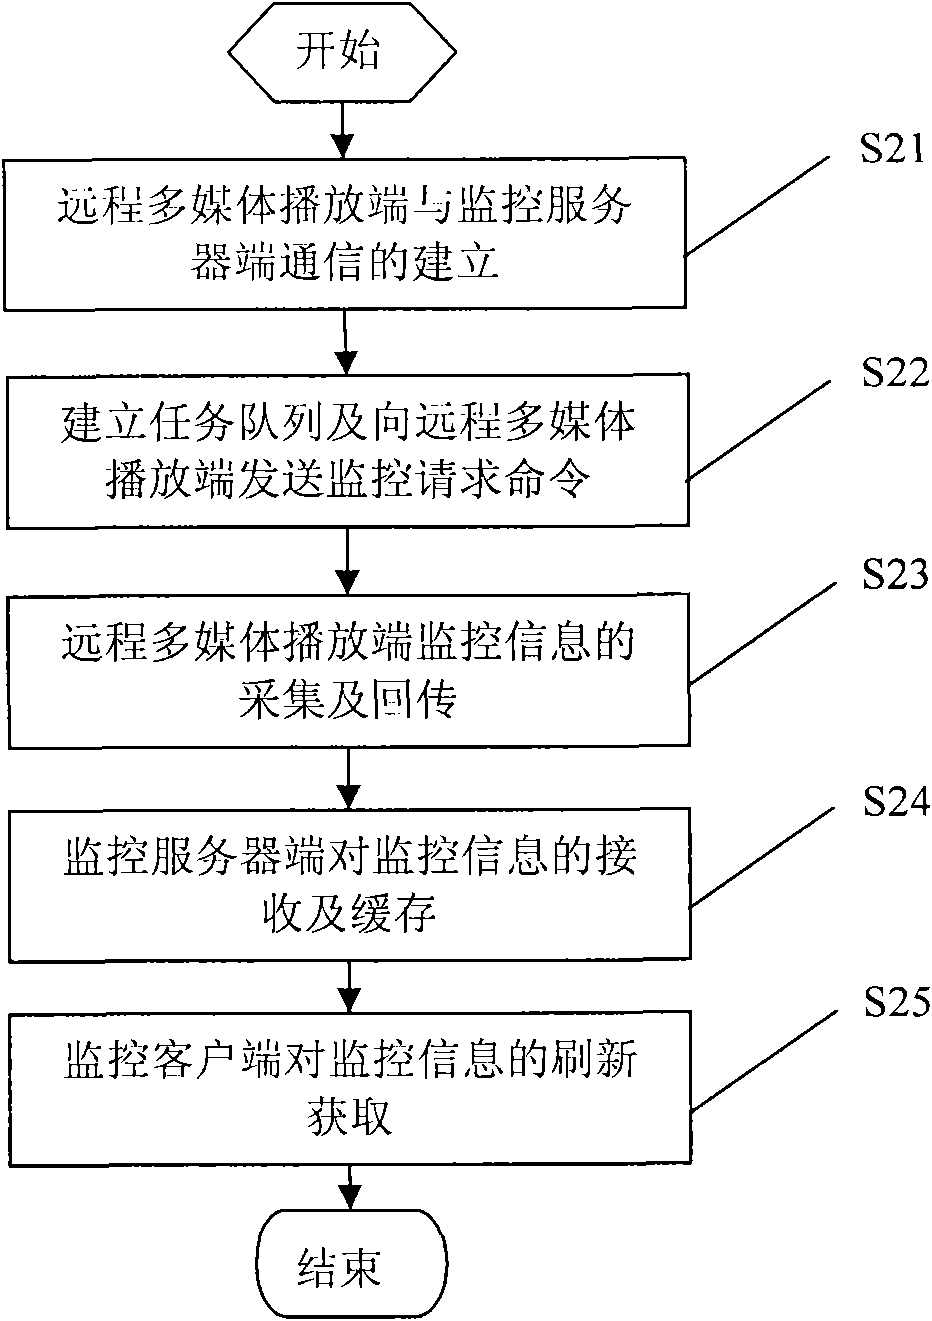 Webpage-based remote multimedia monitoring method and system